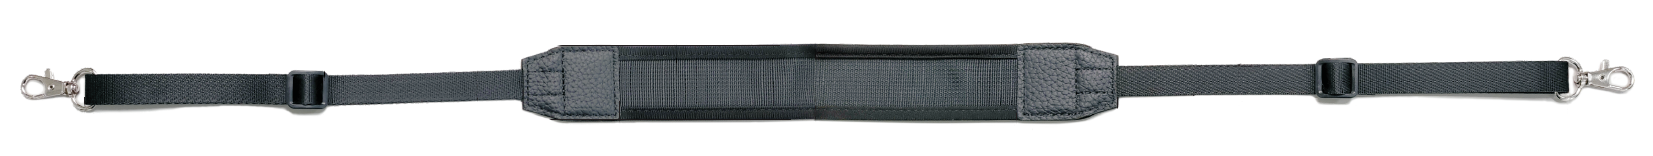 This figure shows the Adjustable Shoulder Strap for the Oracle MICROS Tablet 21P.